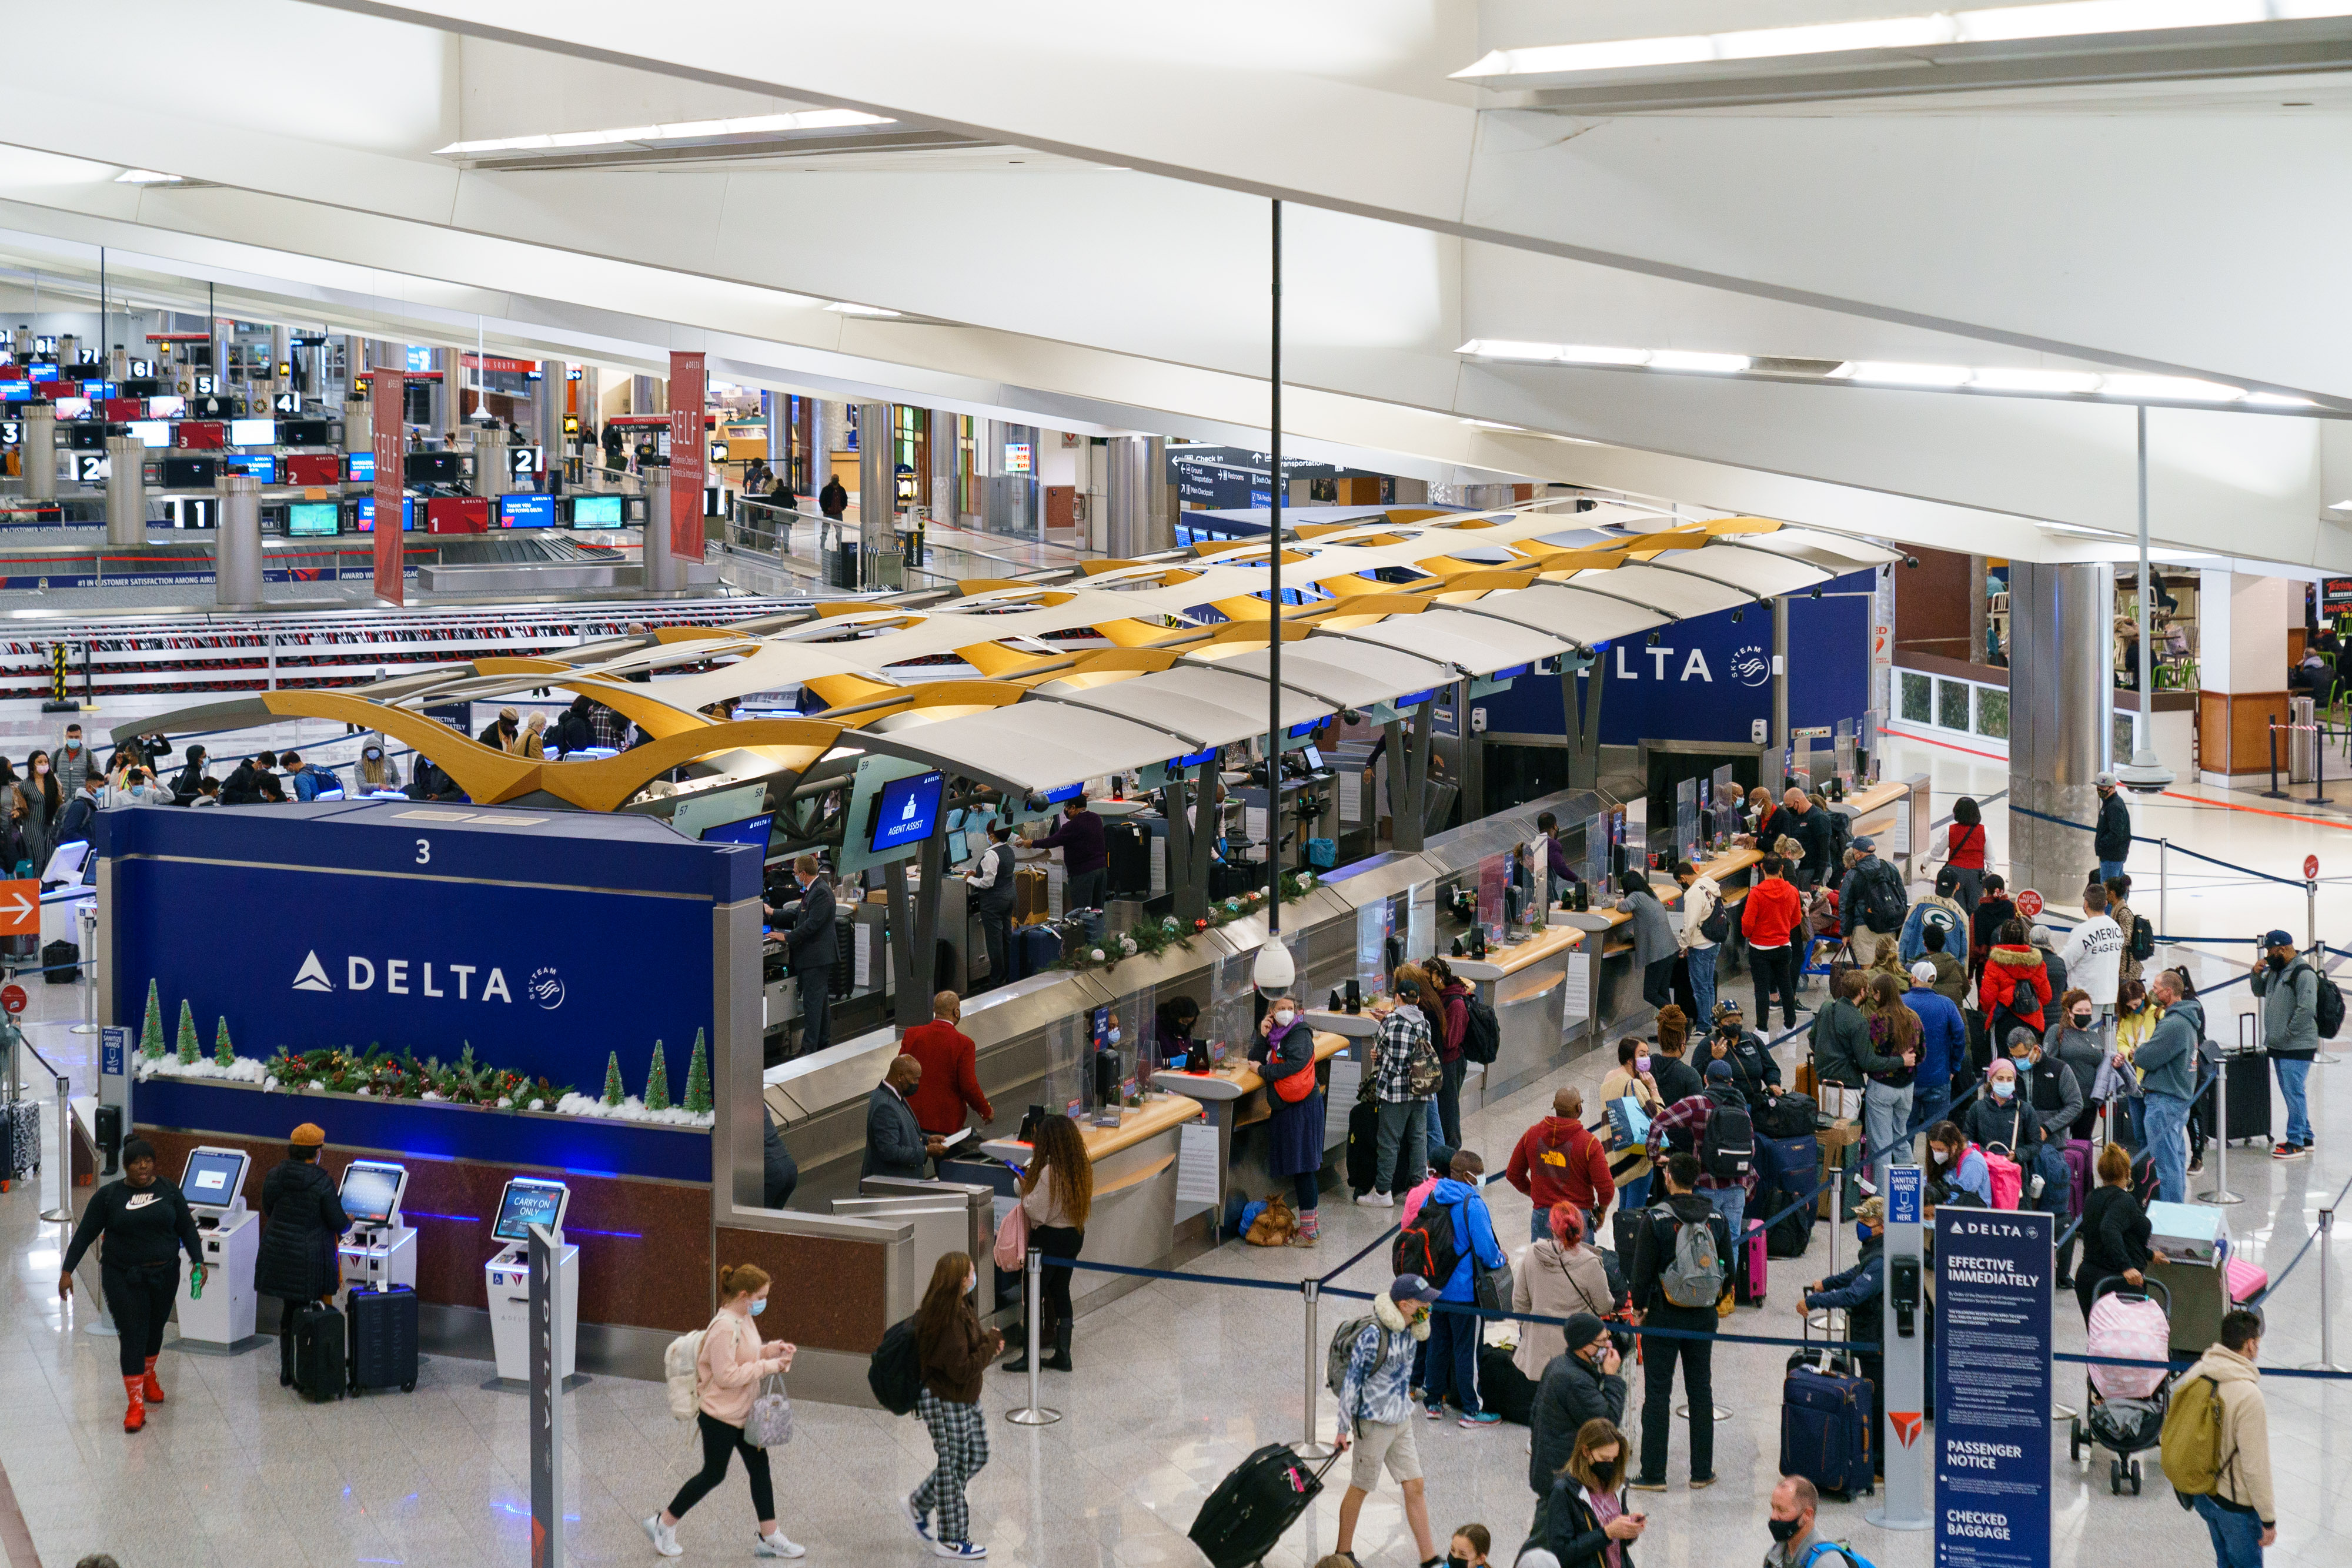 The Delta Air Lines check-in area at the Atlanta airport